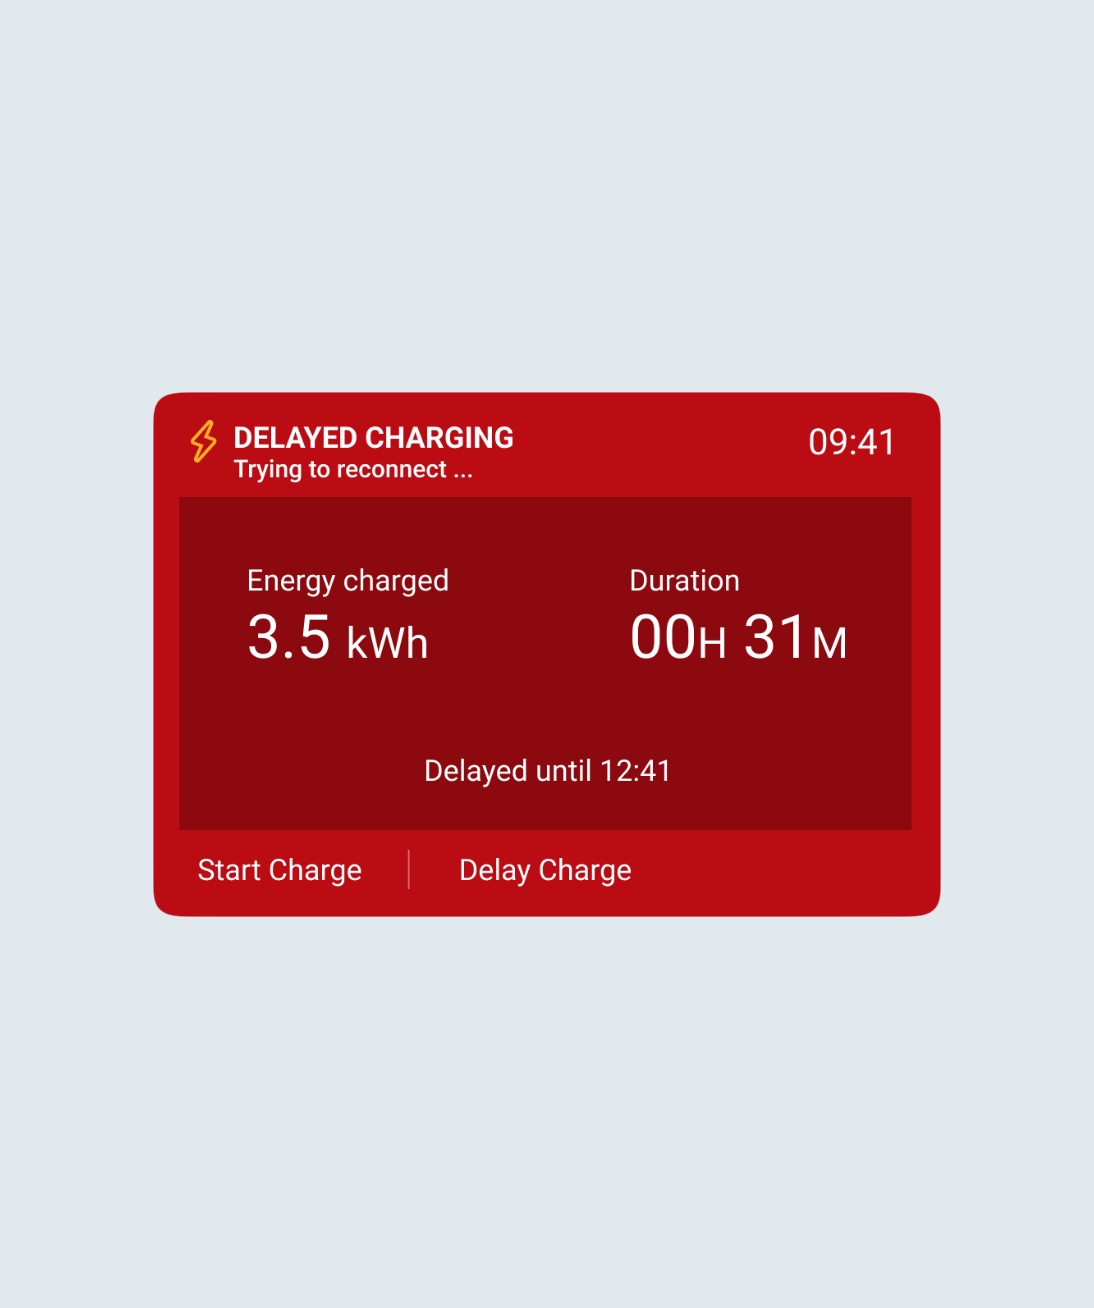 Ohme Home Pro display showing a max charge session, charger offline. Energy usage shown with the time the charge is delayed until